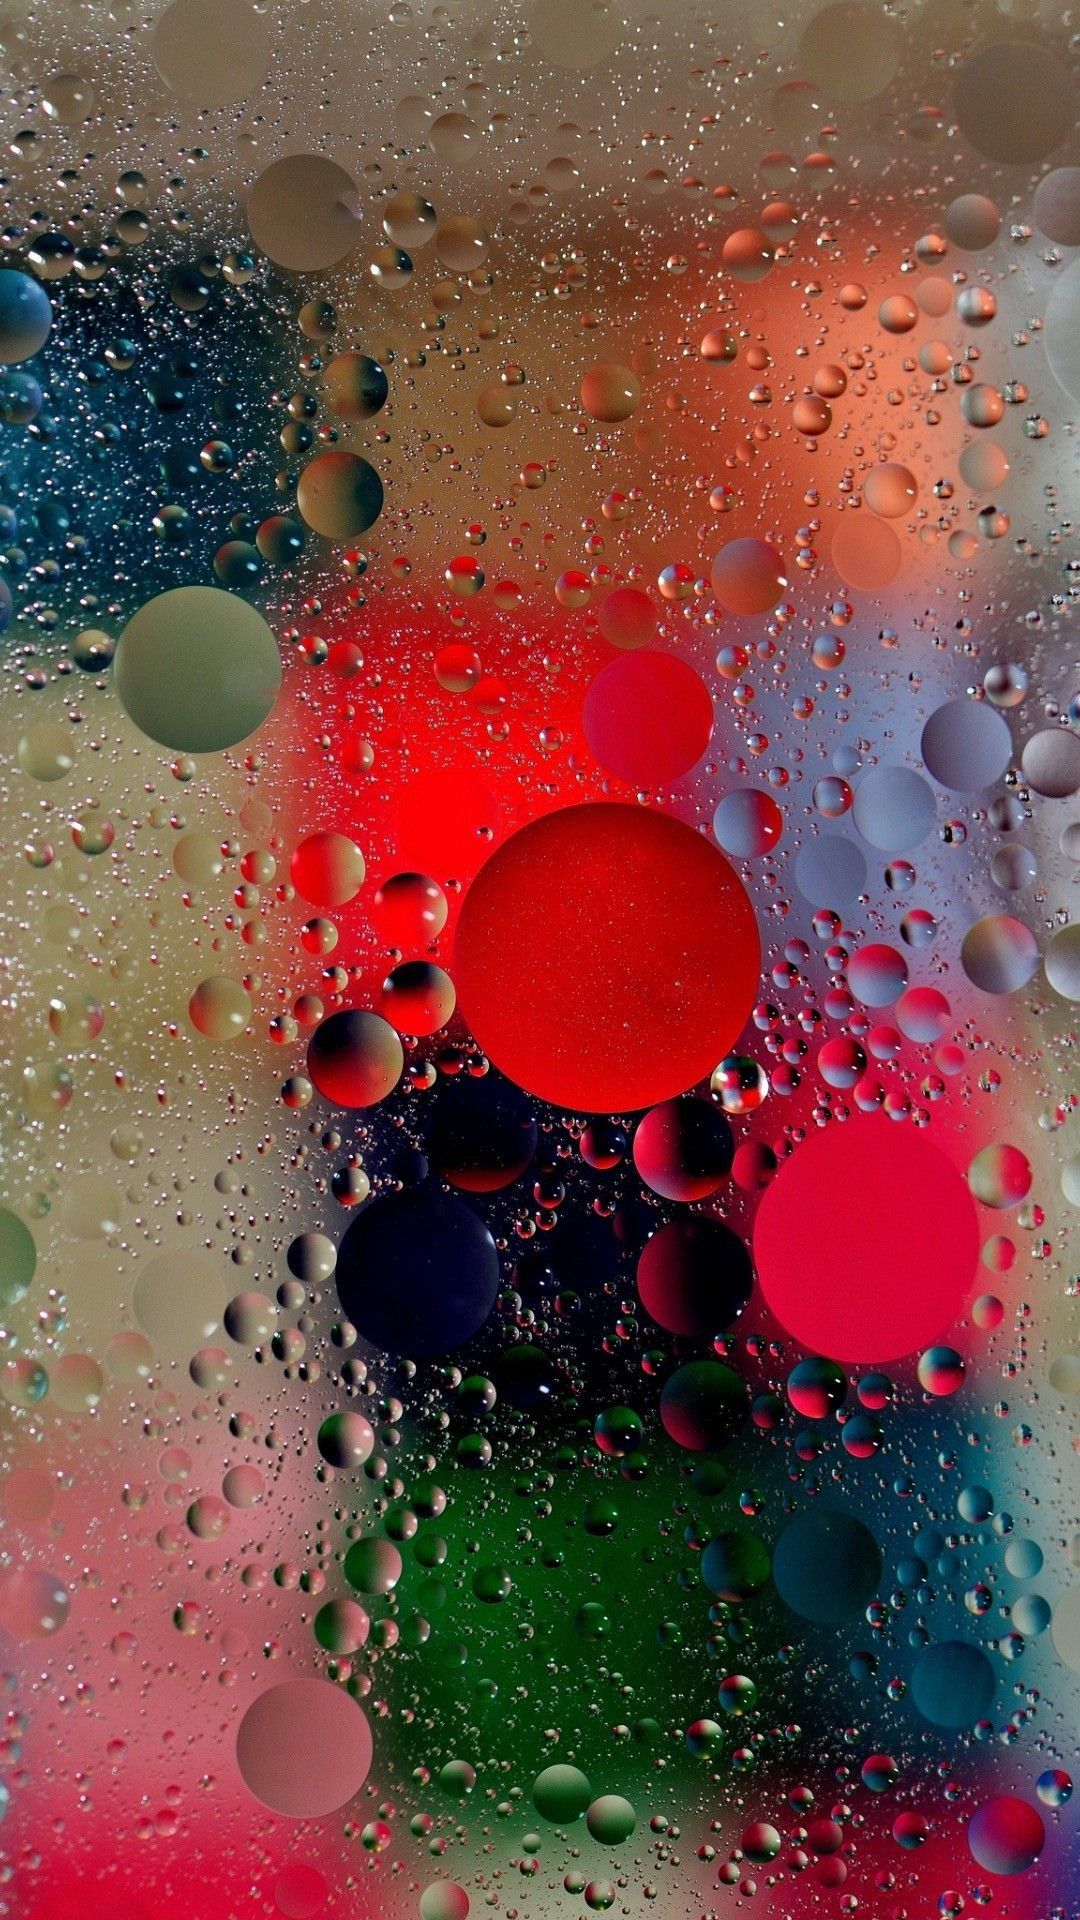 A close up of water droplets on glass - Bubbles